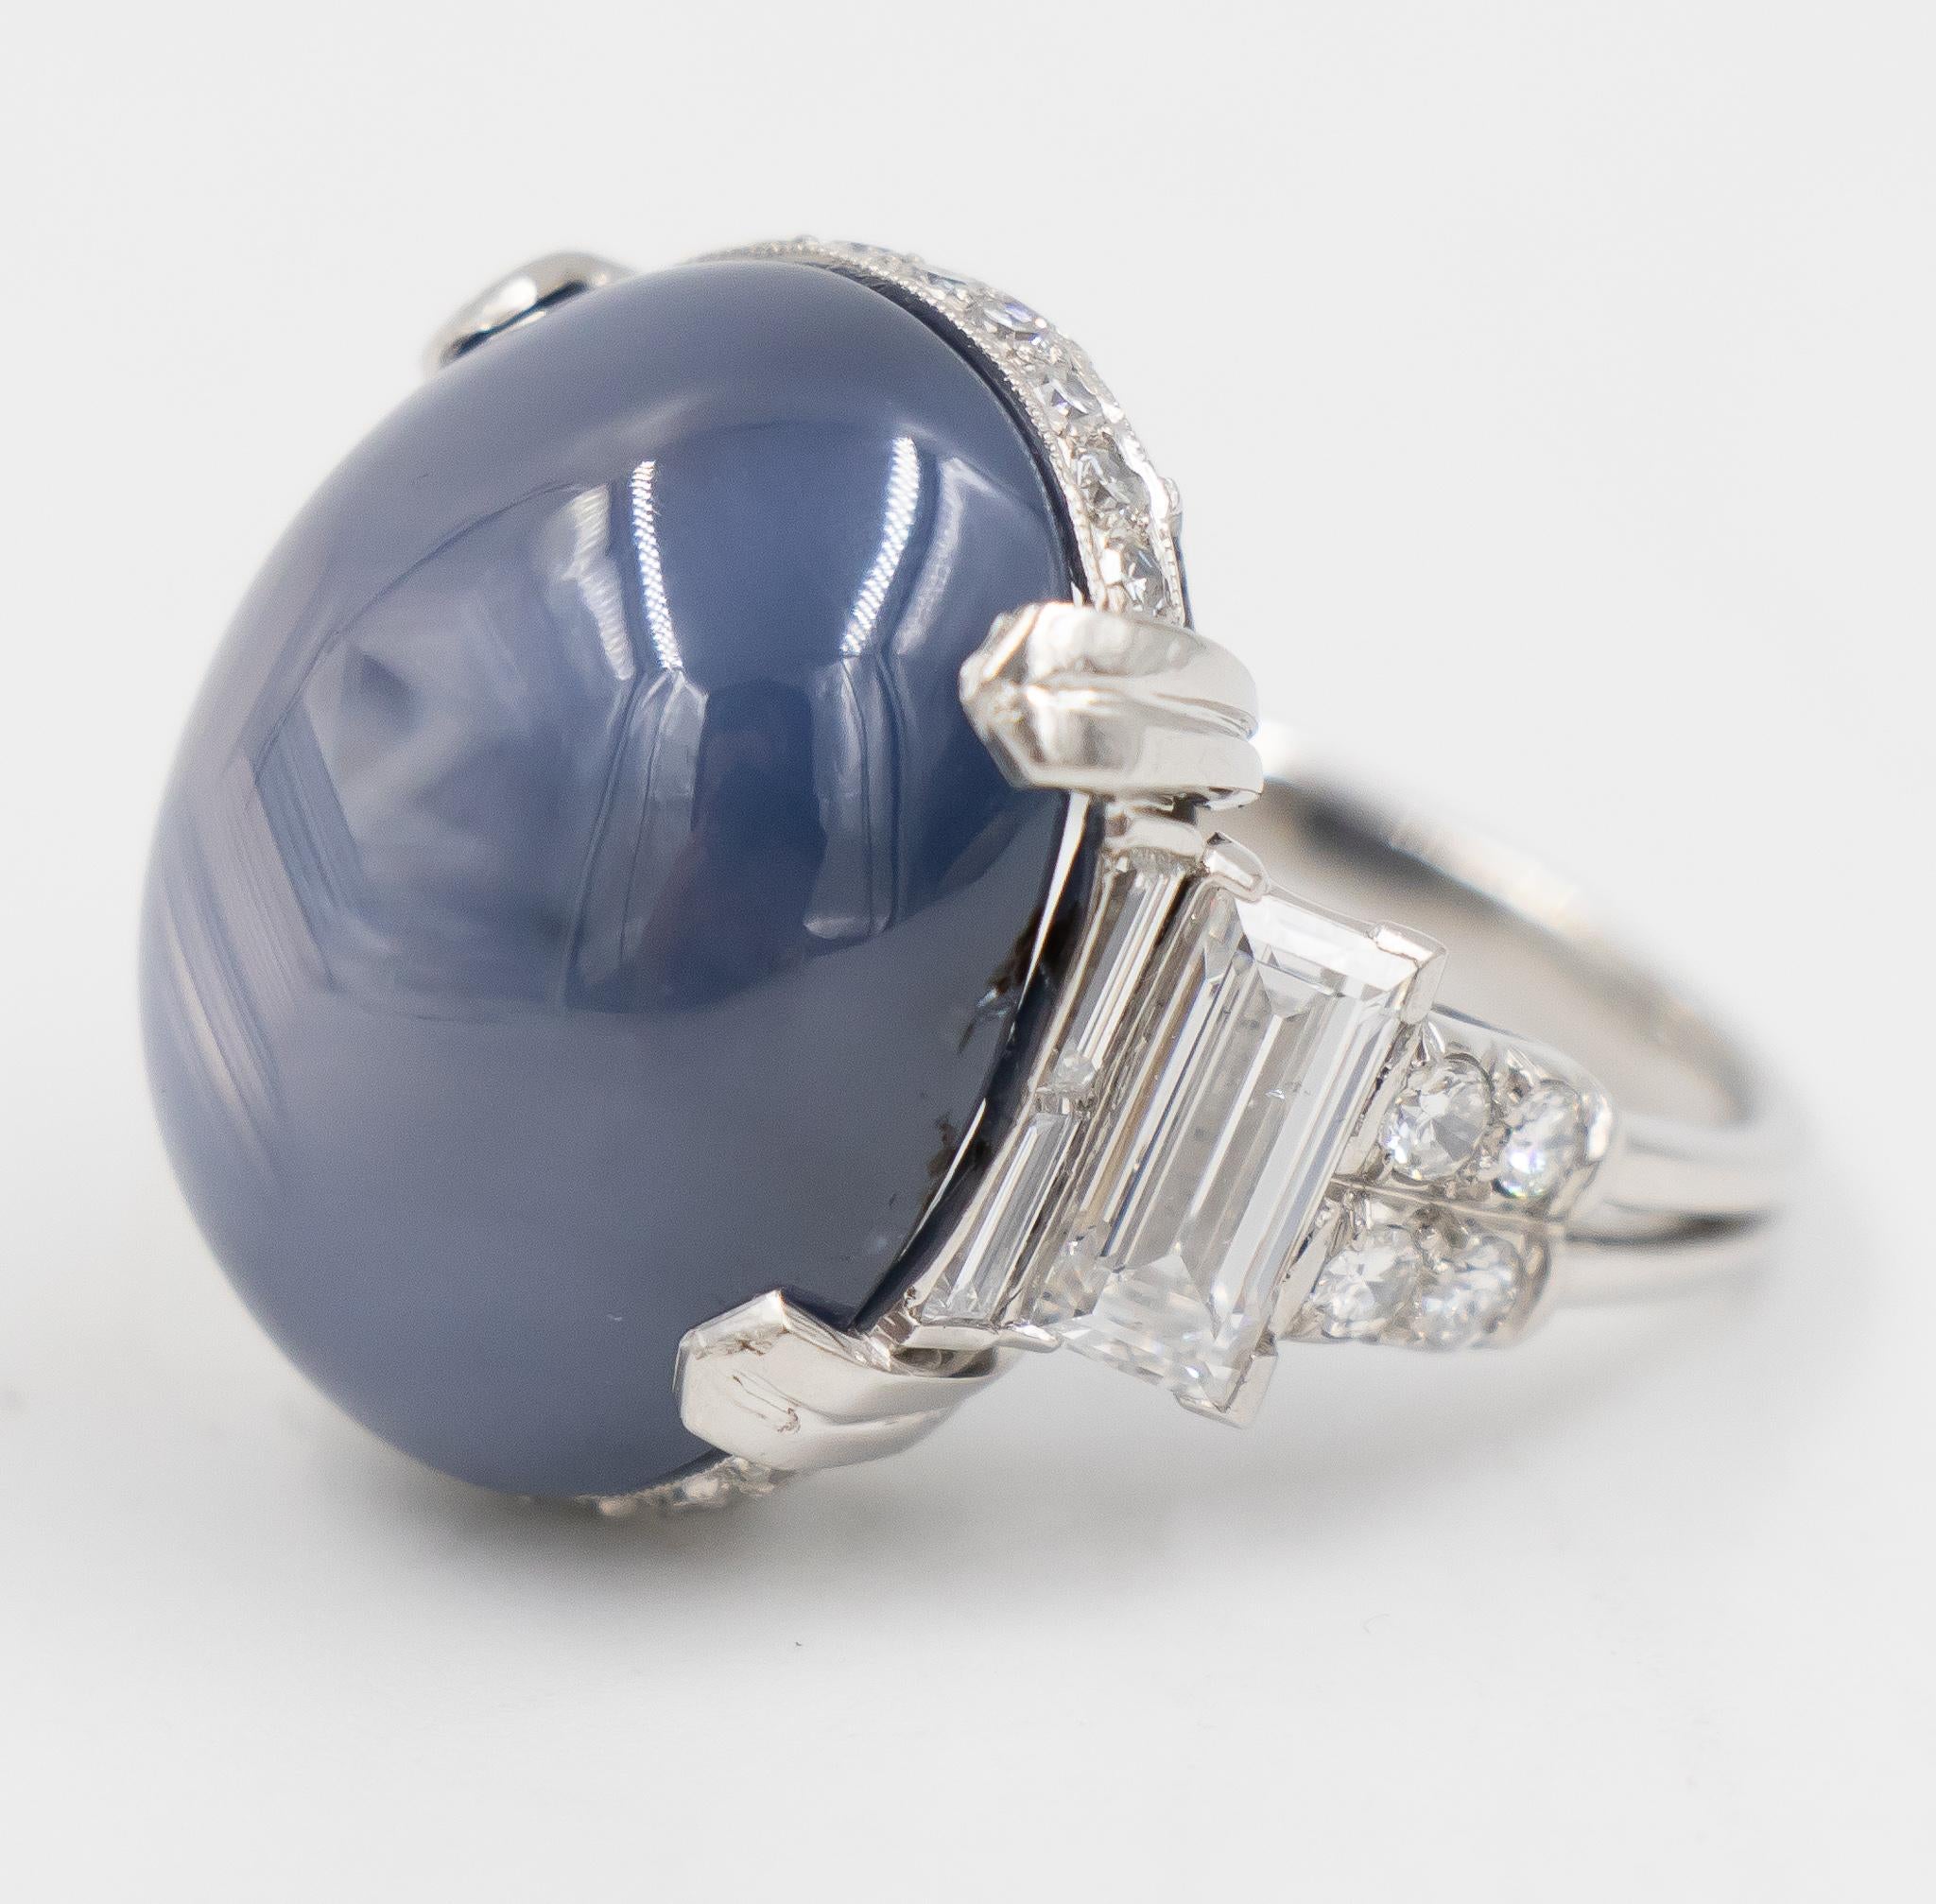 Back in 1935 this ring was created for Cartier by famous jewelry designer, Oscar Heyman.  This design has been created in platinum with custom baguette diamonds and round brilliant diamonds accenting the sapphire.  The star sapphire has a beautiful